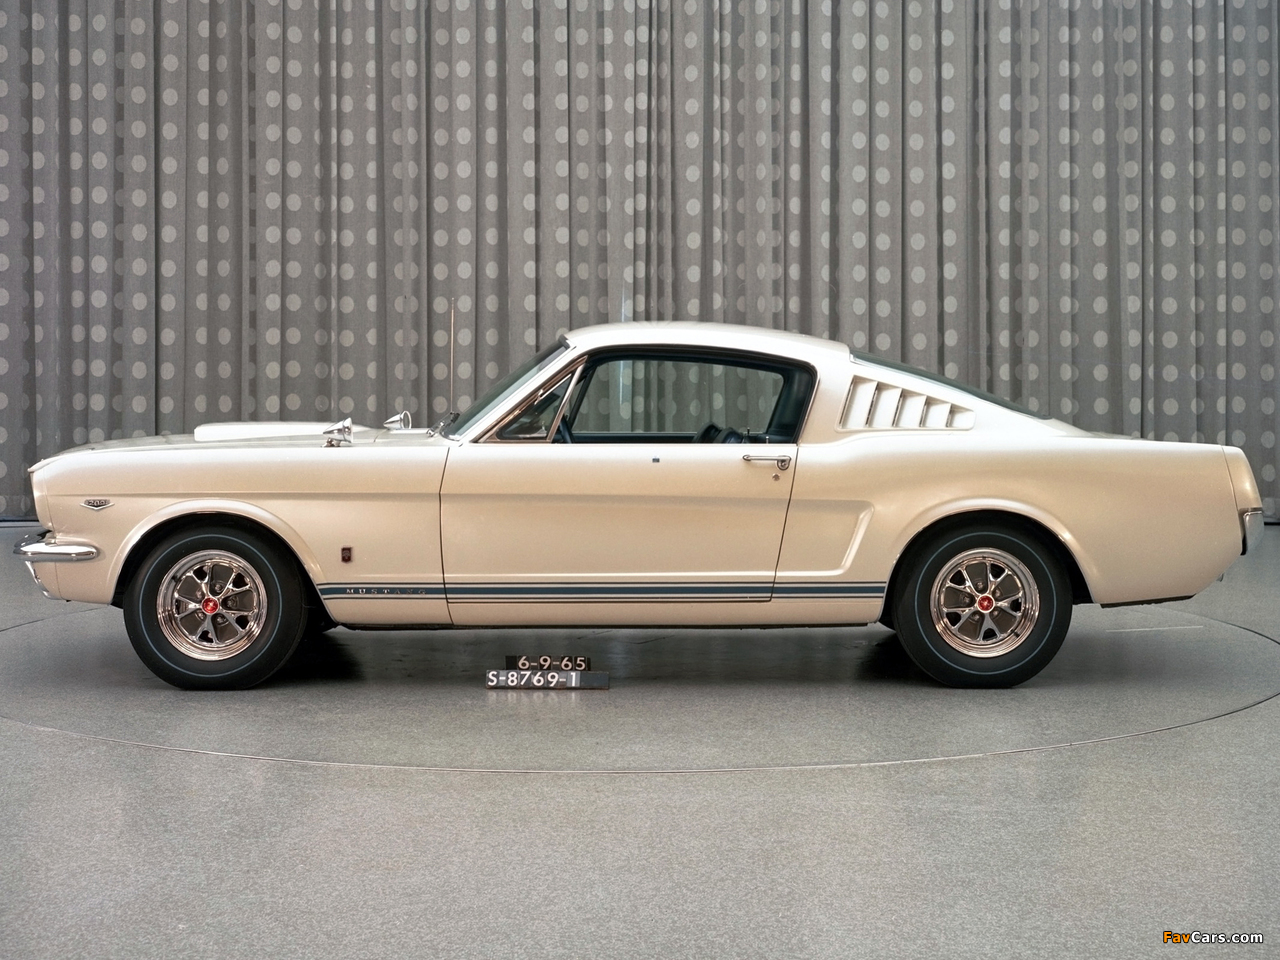 Images of Mustang GT Fastback EBF II 1965 (1280 x 960)